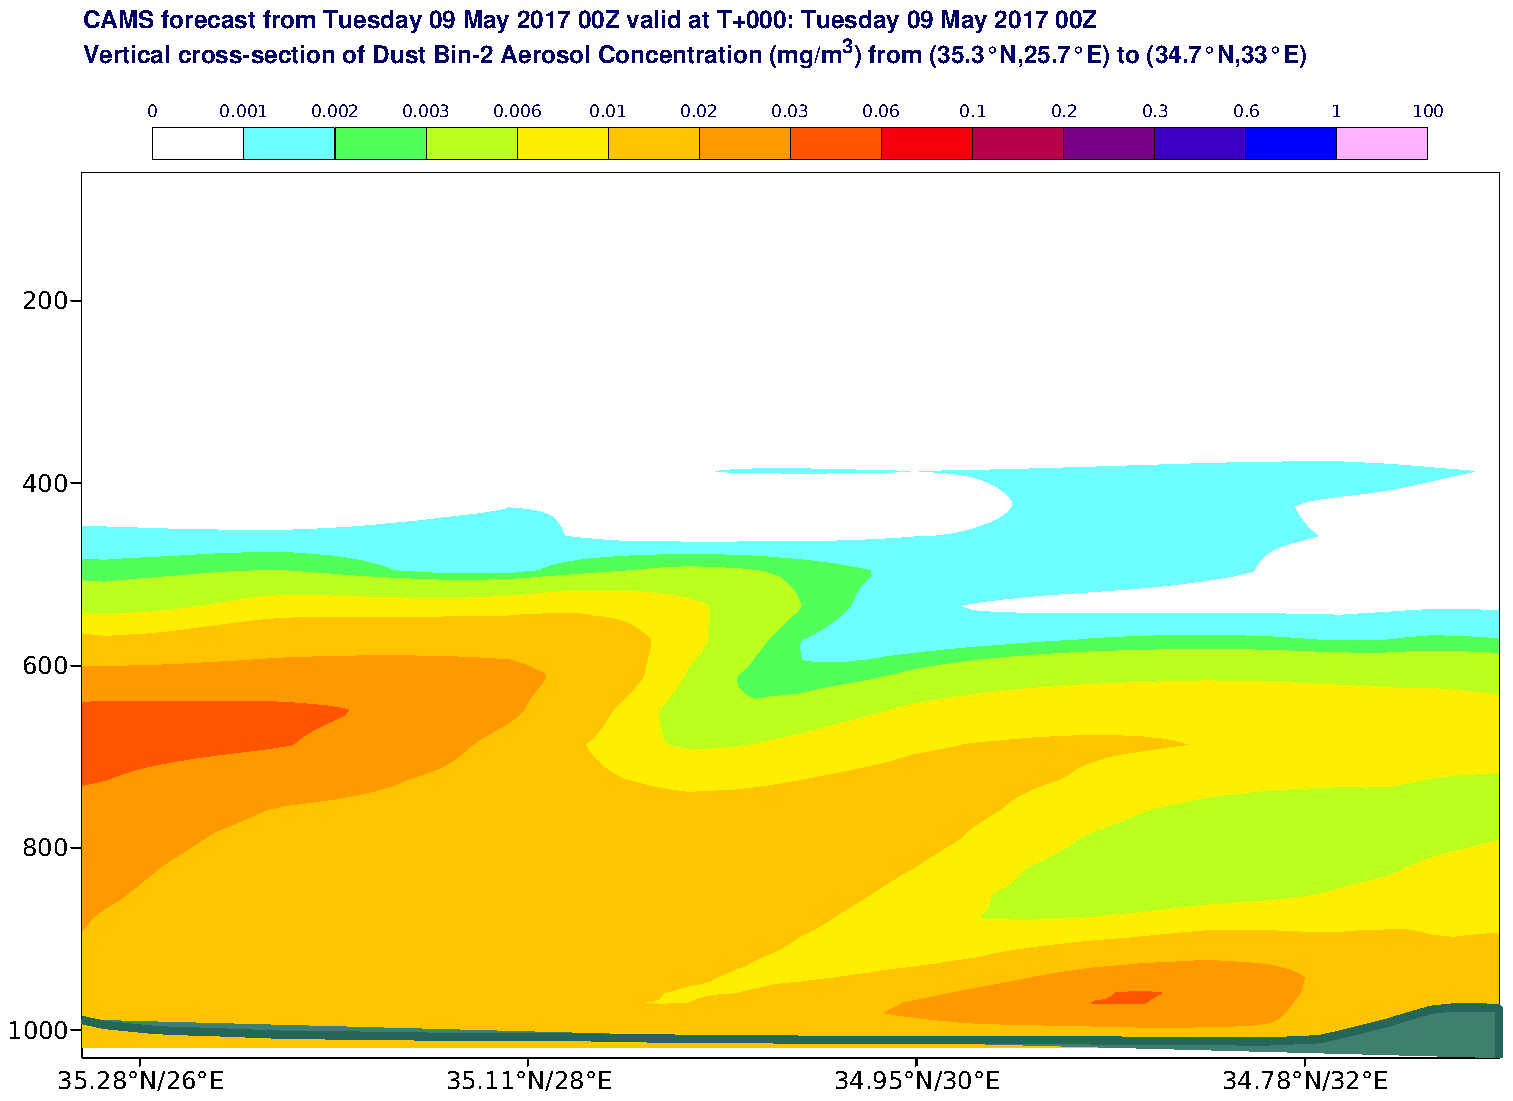 Vertical cross-section of Dust Bin-2 Aerosol Concentration (mg/m3) valid at T0 - 2017-05-09 00:00